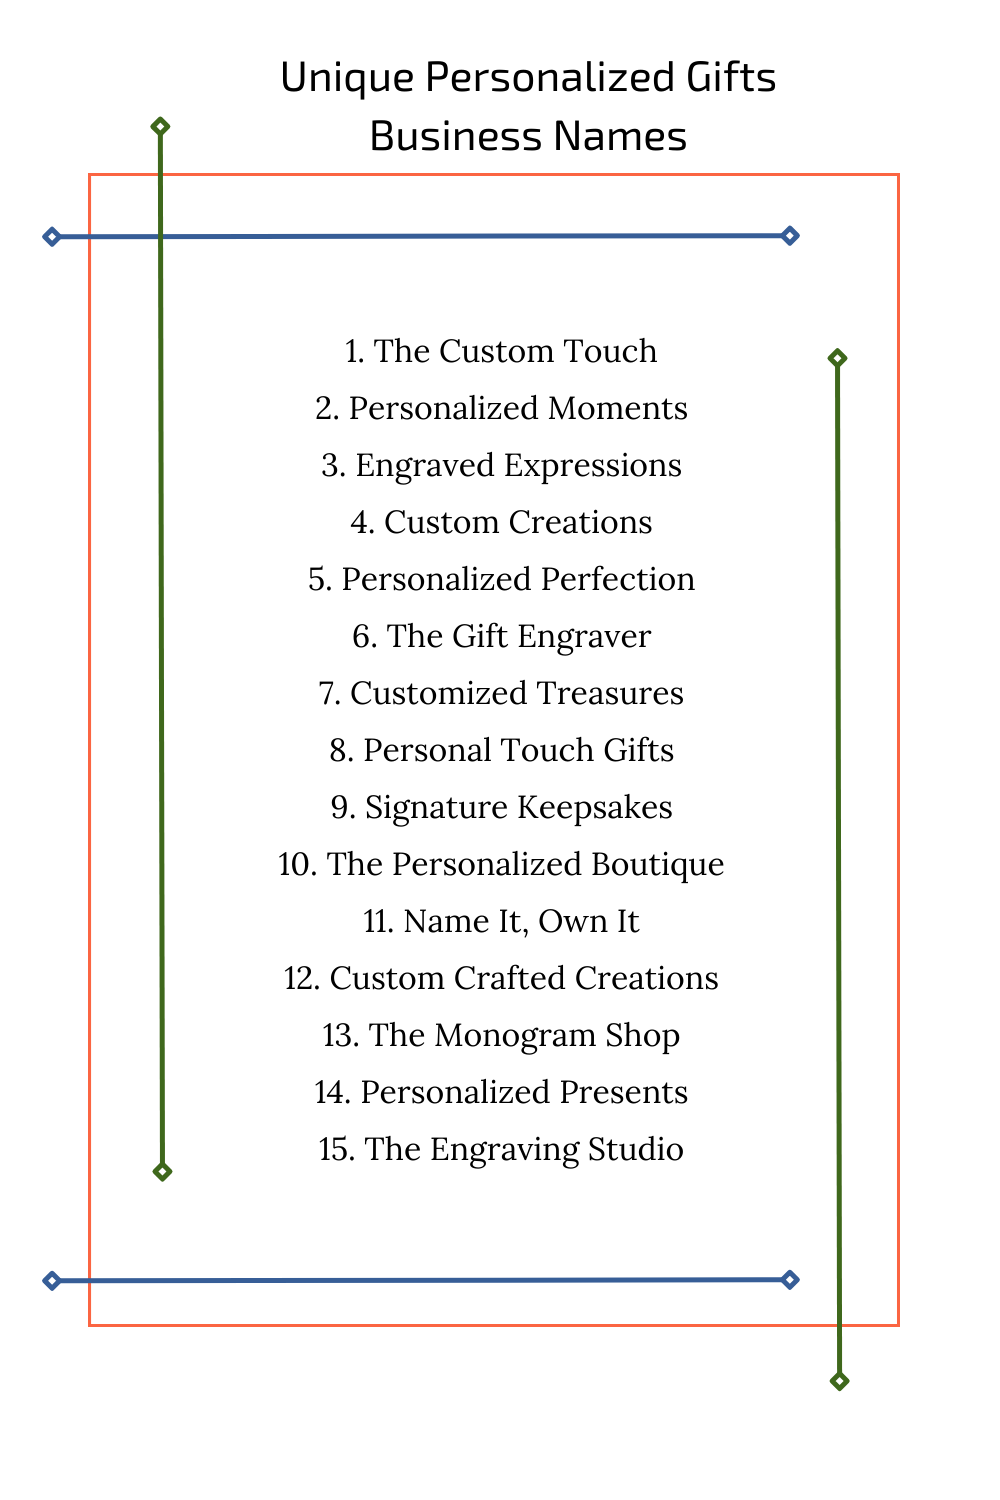 Unique Personalized Gifts Business Names